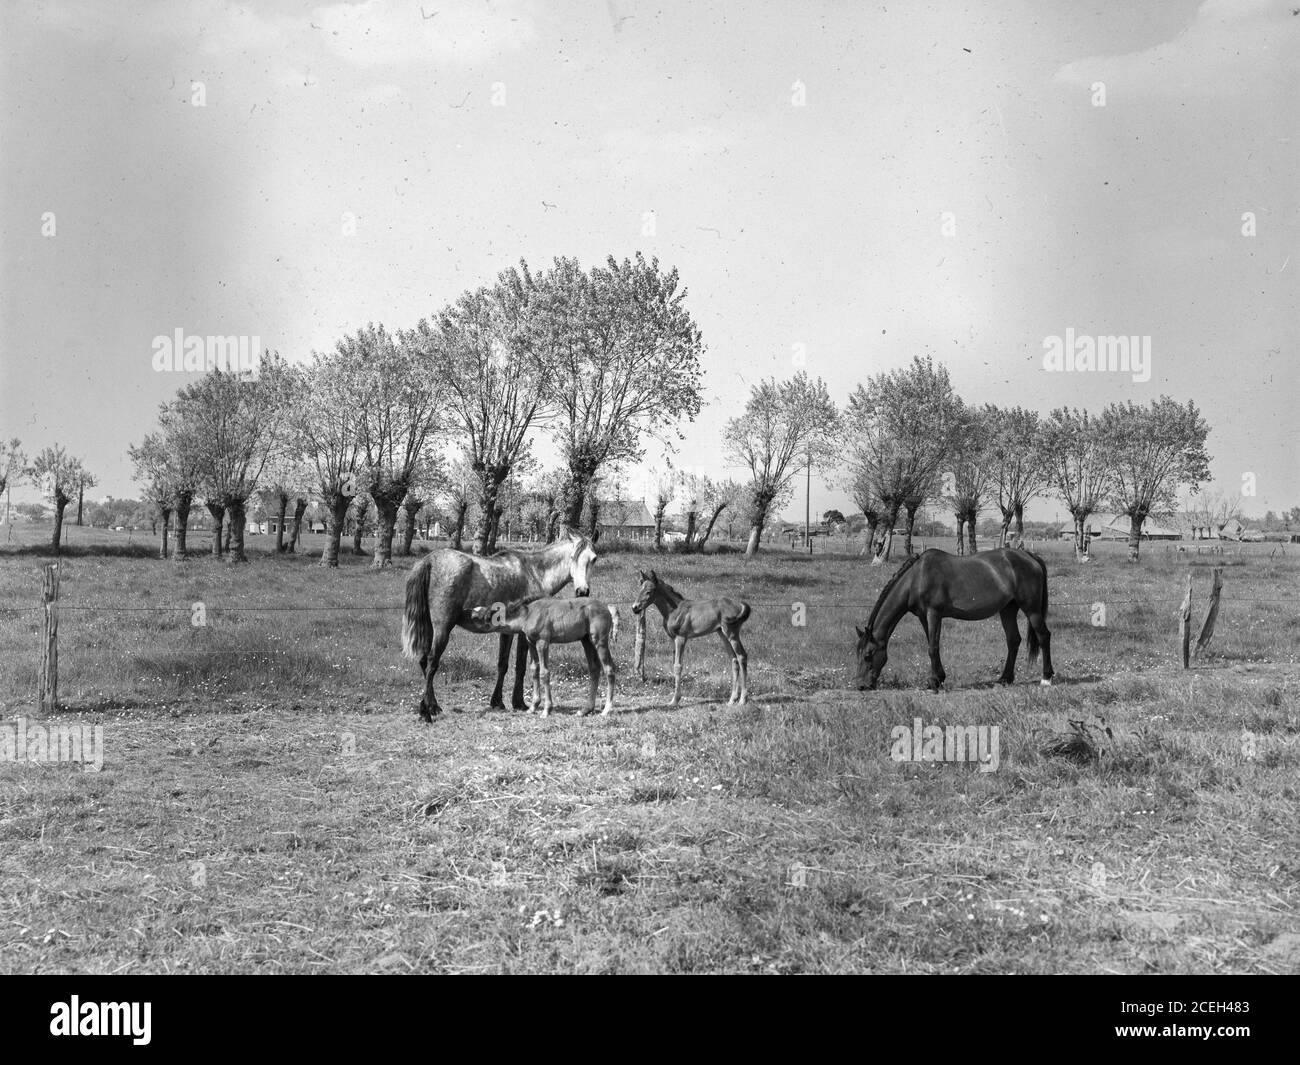 View in black and white of horses walking and pasturing on field with trees on background, Belgium. Stock Photo